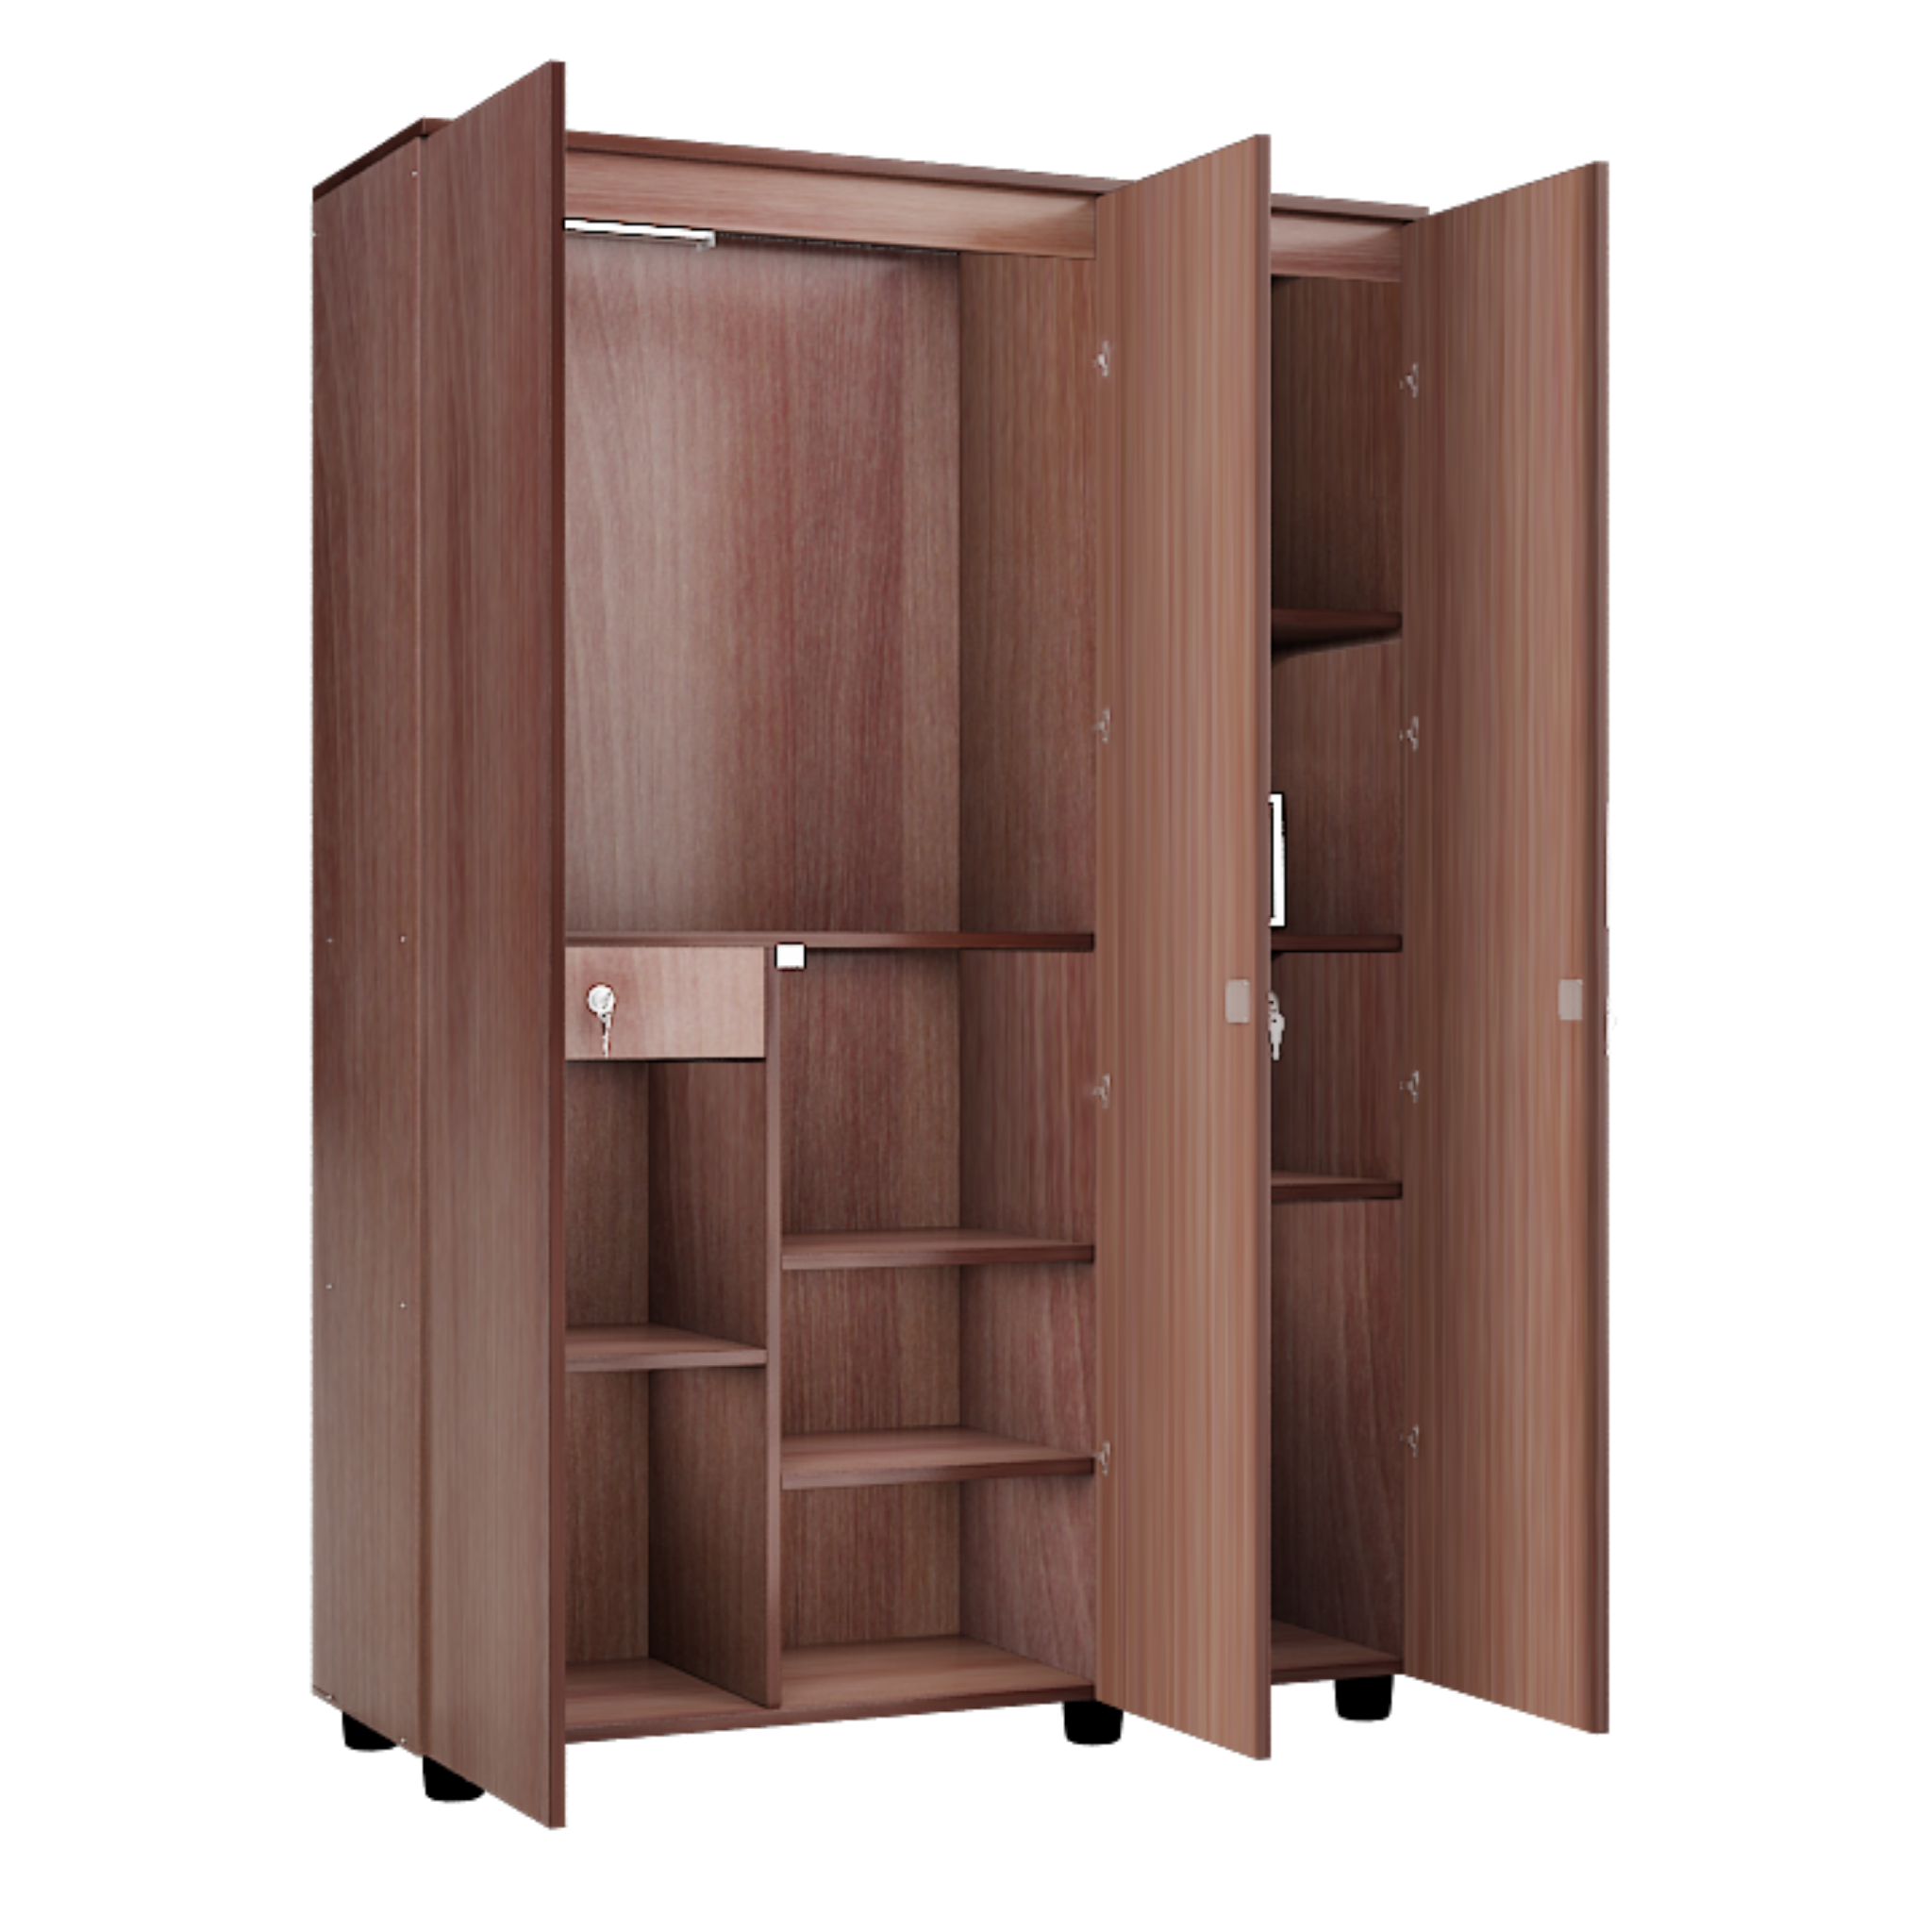 Super and Luxury Three  Door Wardrobe with Center Partition